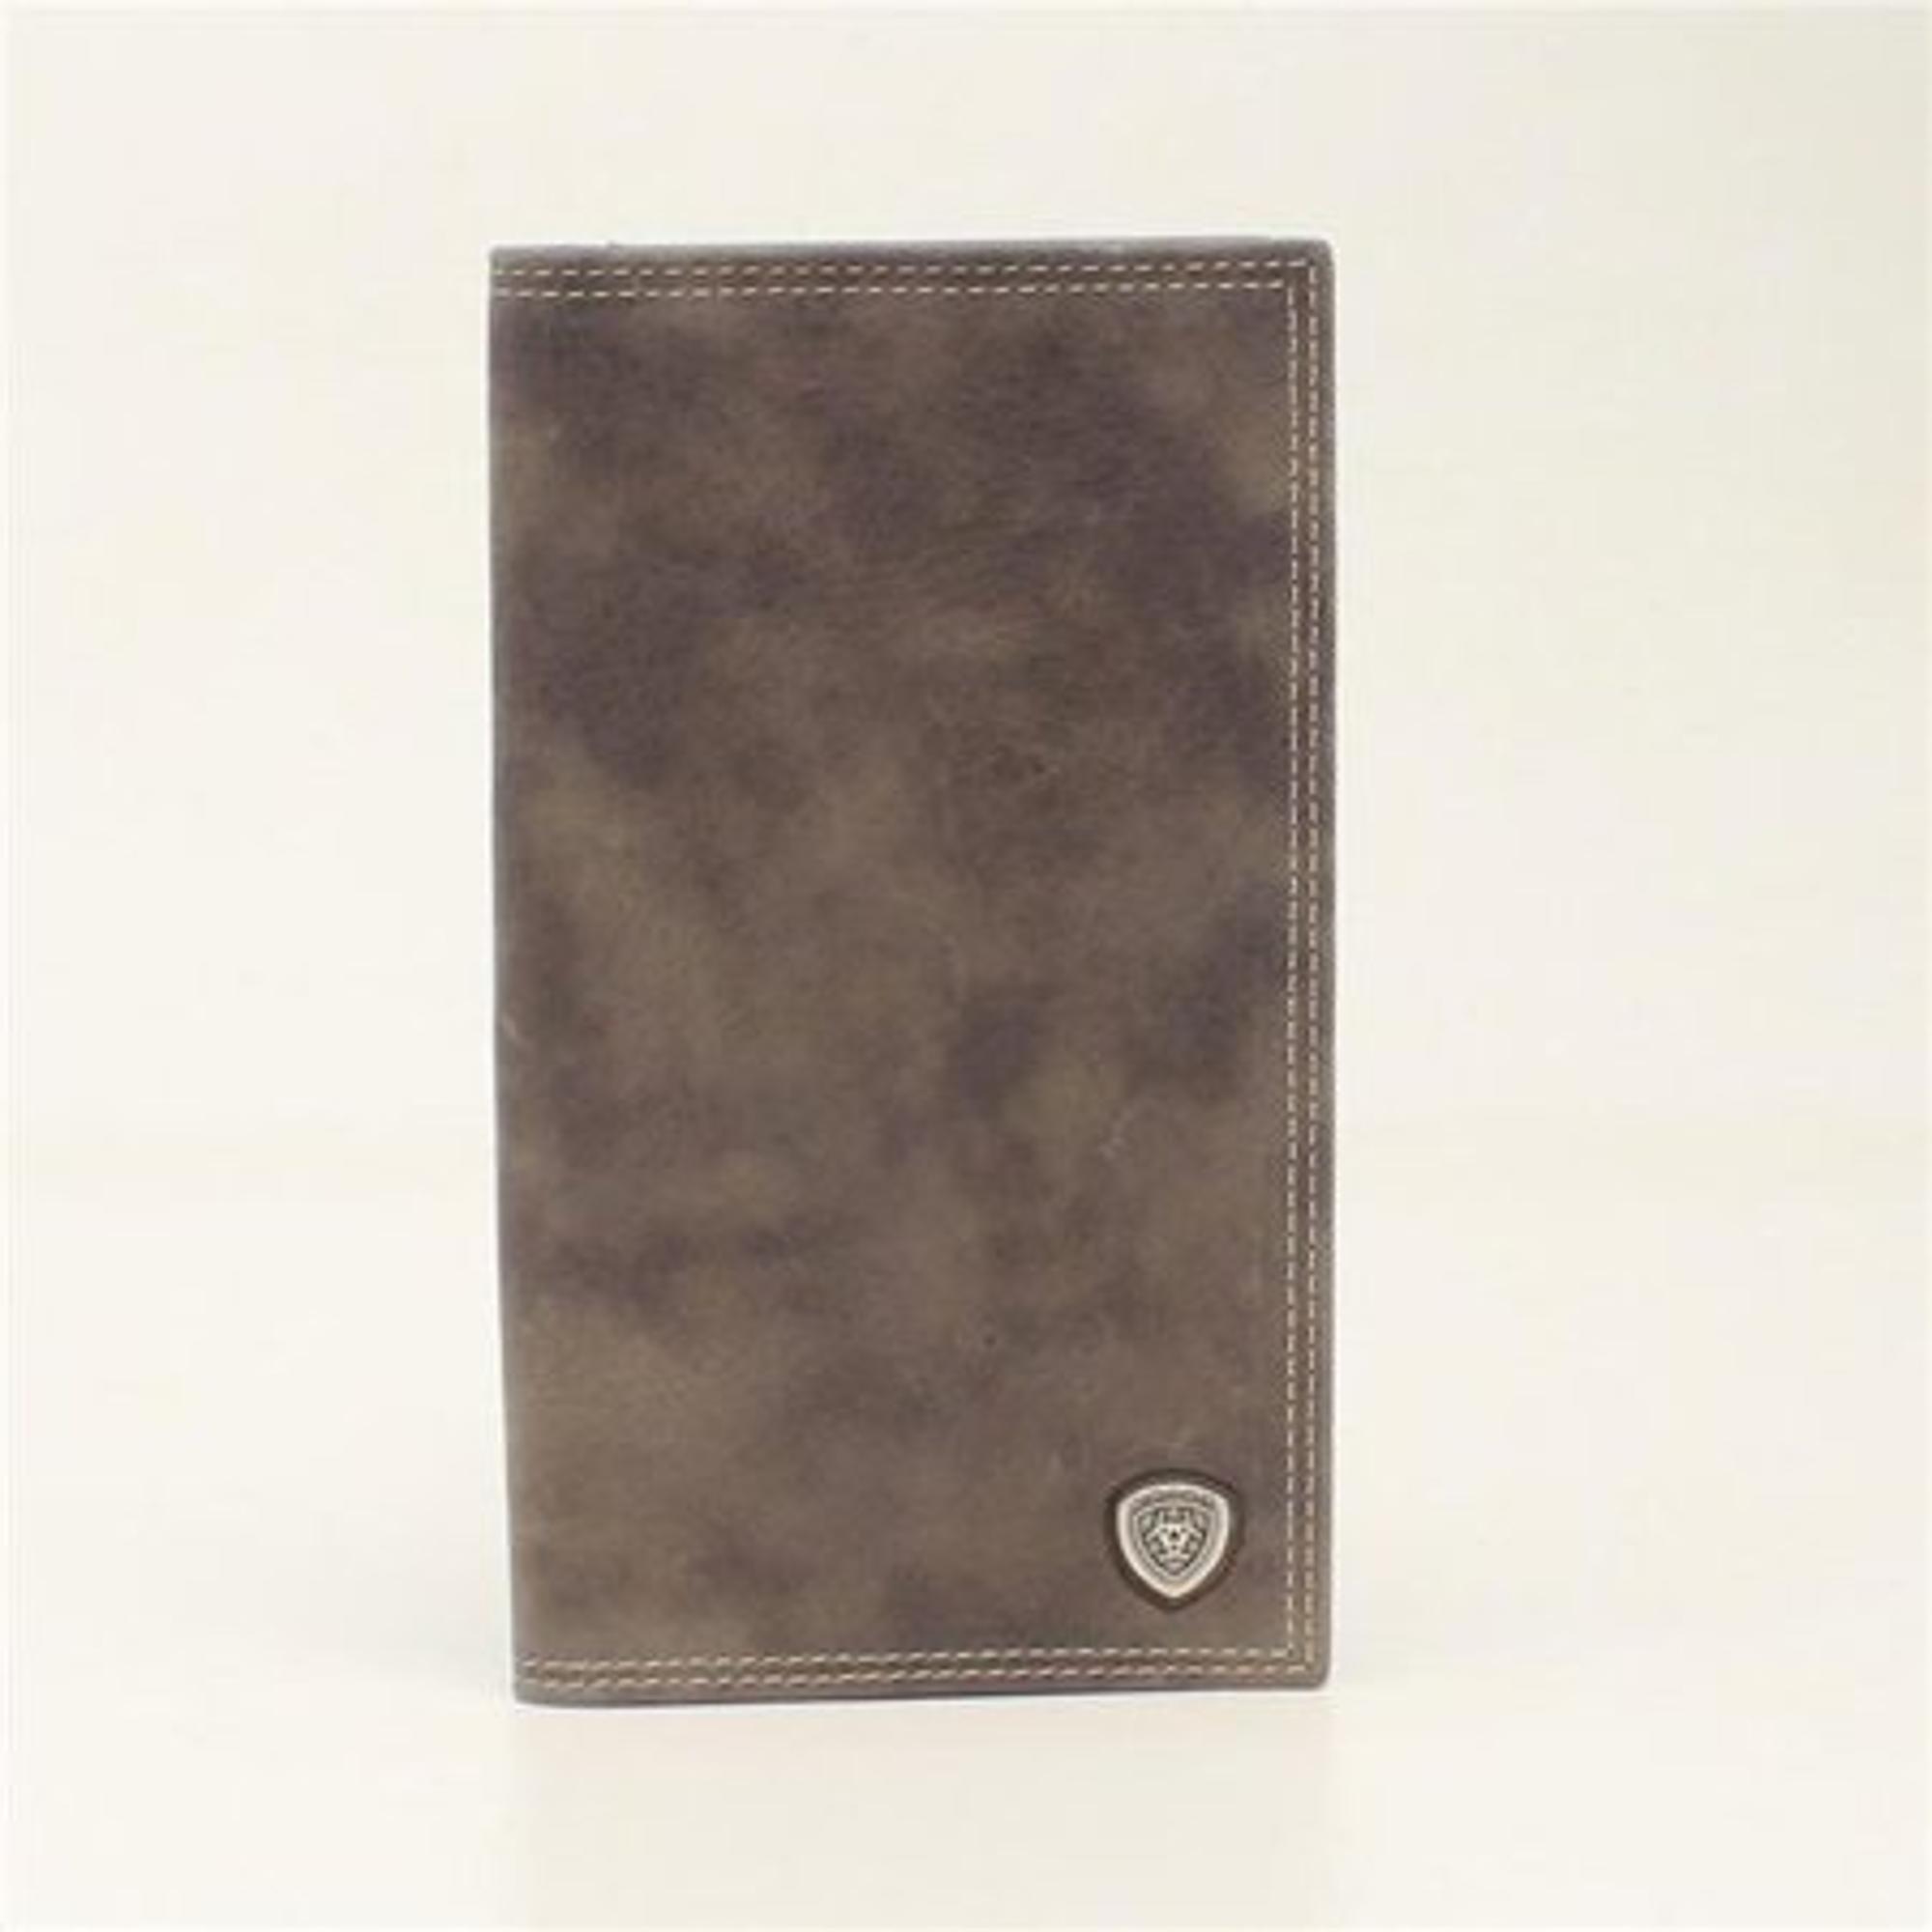 Ariat Rodeo Wallet/Checkbook Cover